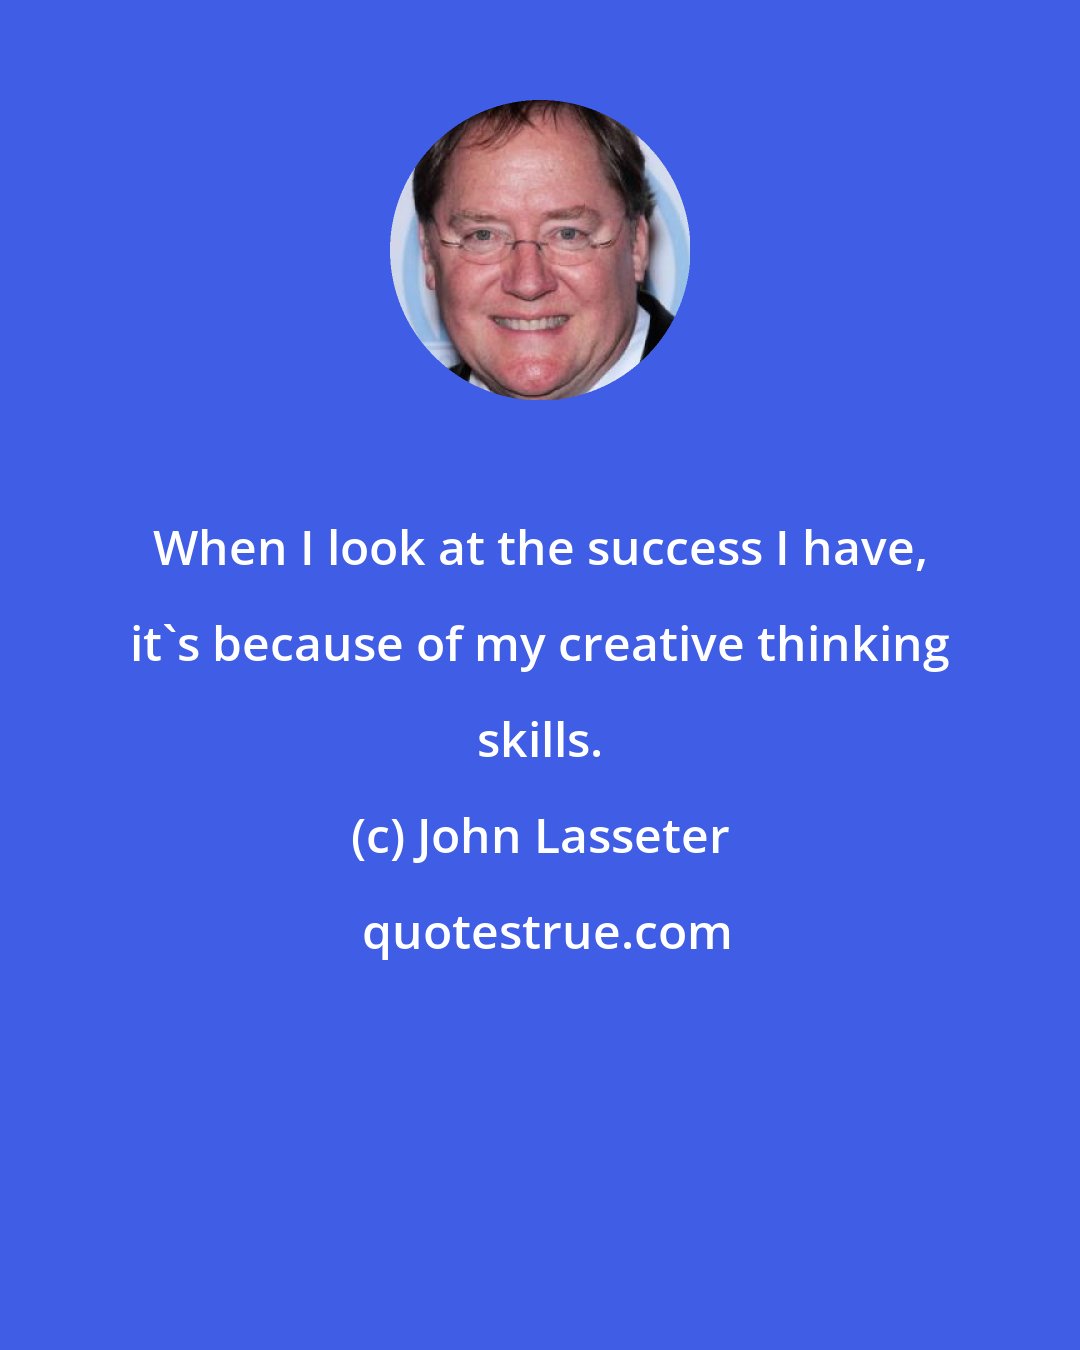 John Lasseter: When I look at the success I have, it's because of my creative thinking skills.